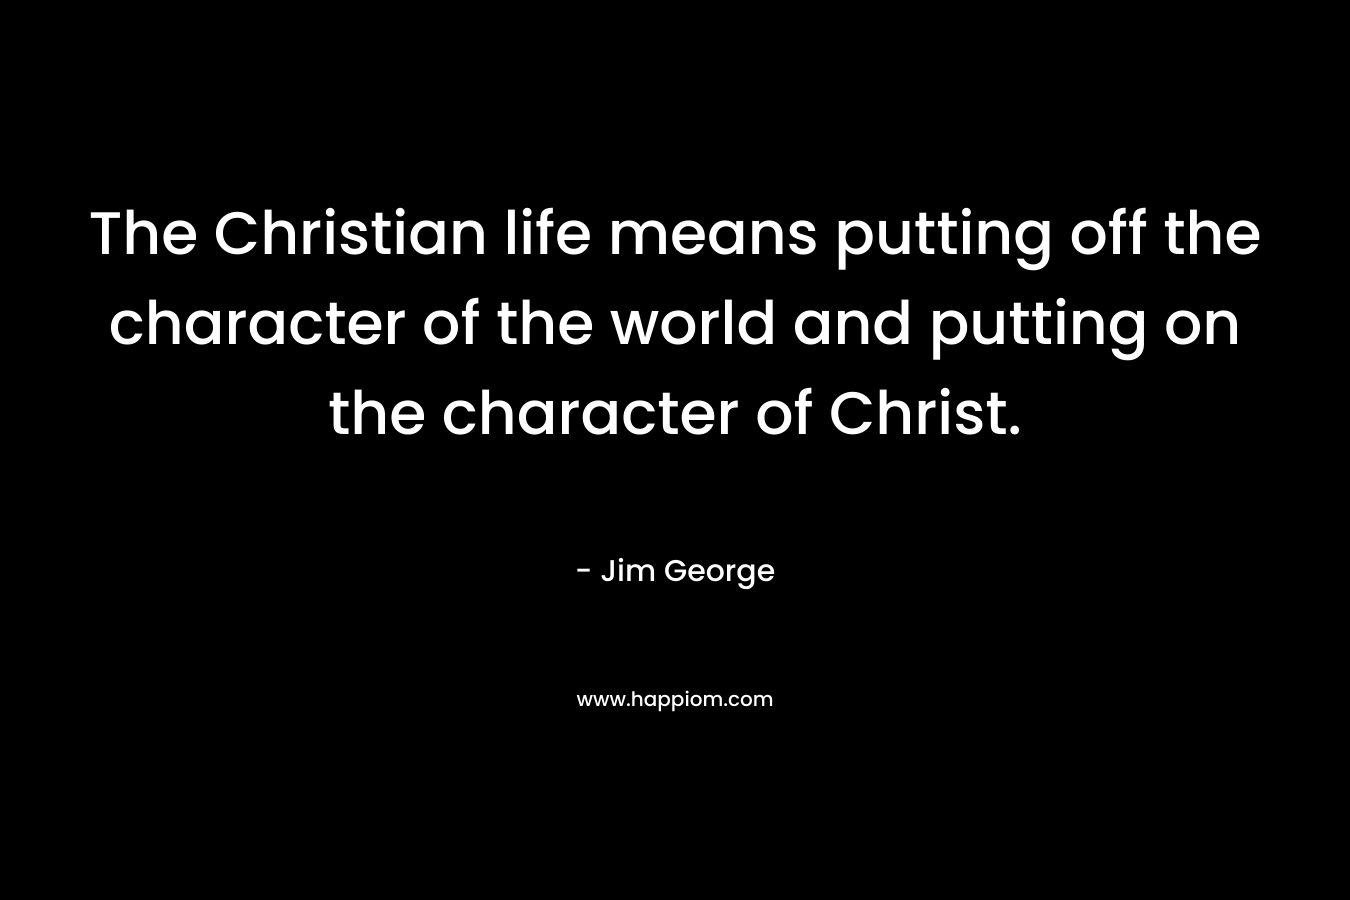 The Christian life means putting off the character of the world and putting on the character of Christ.